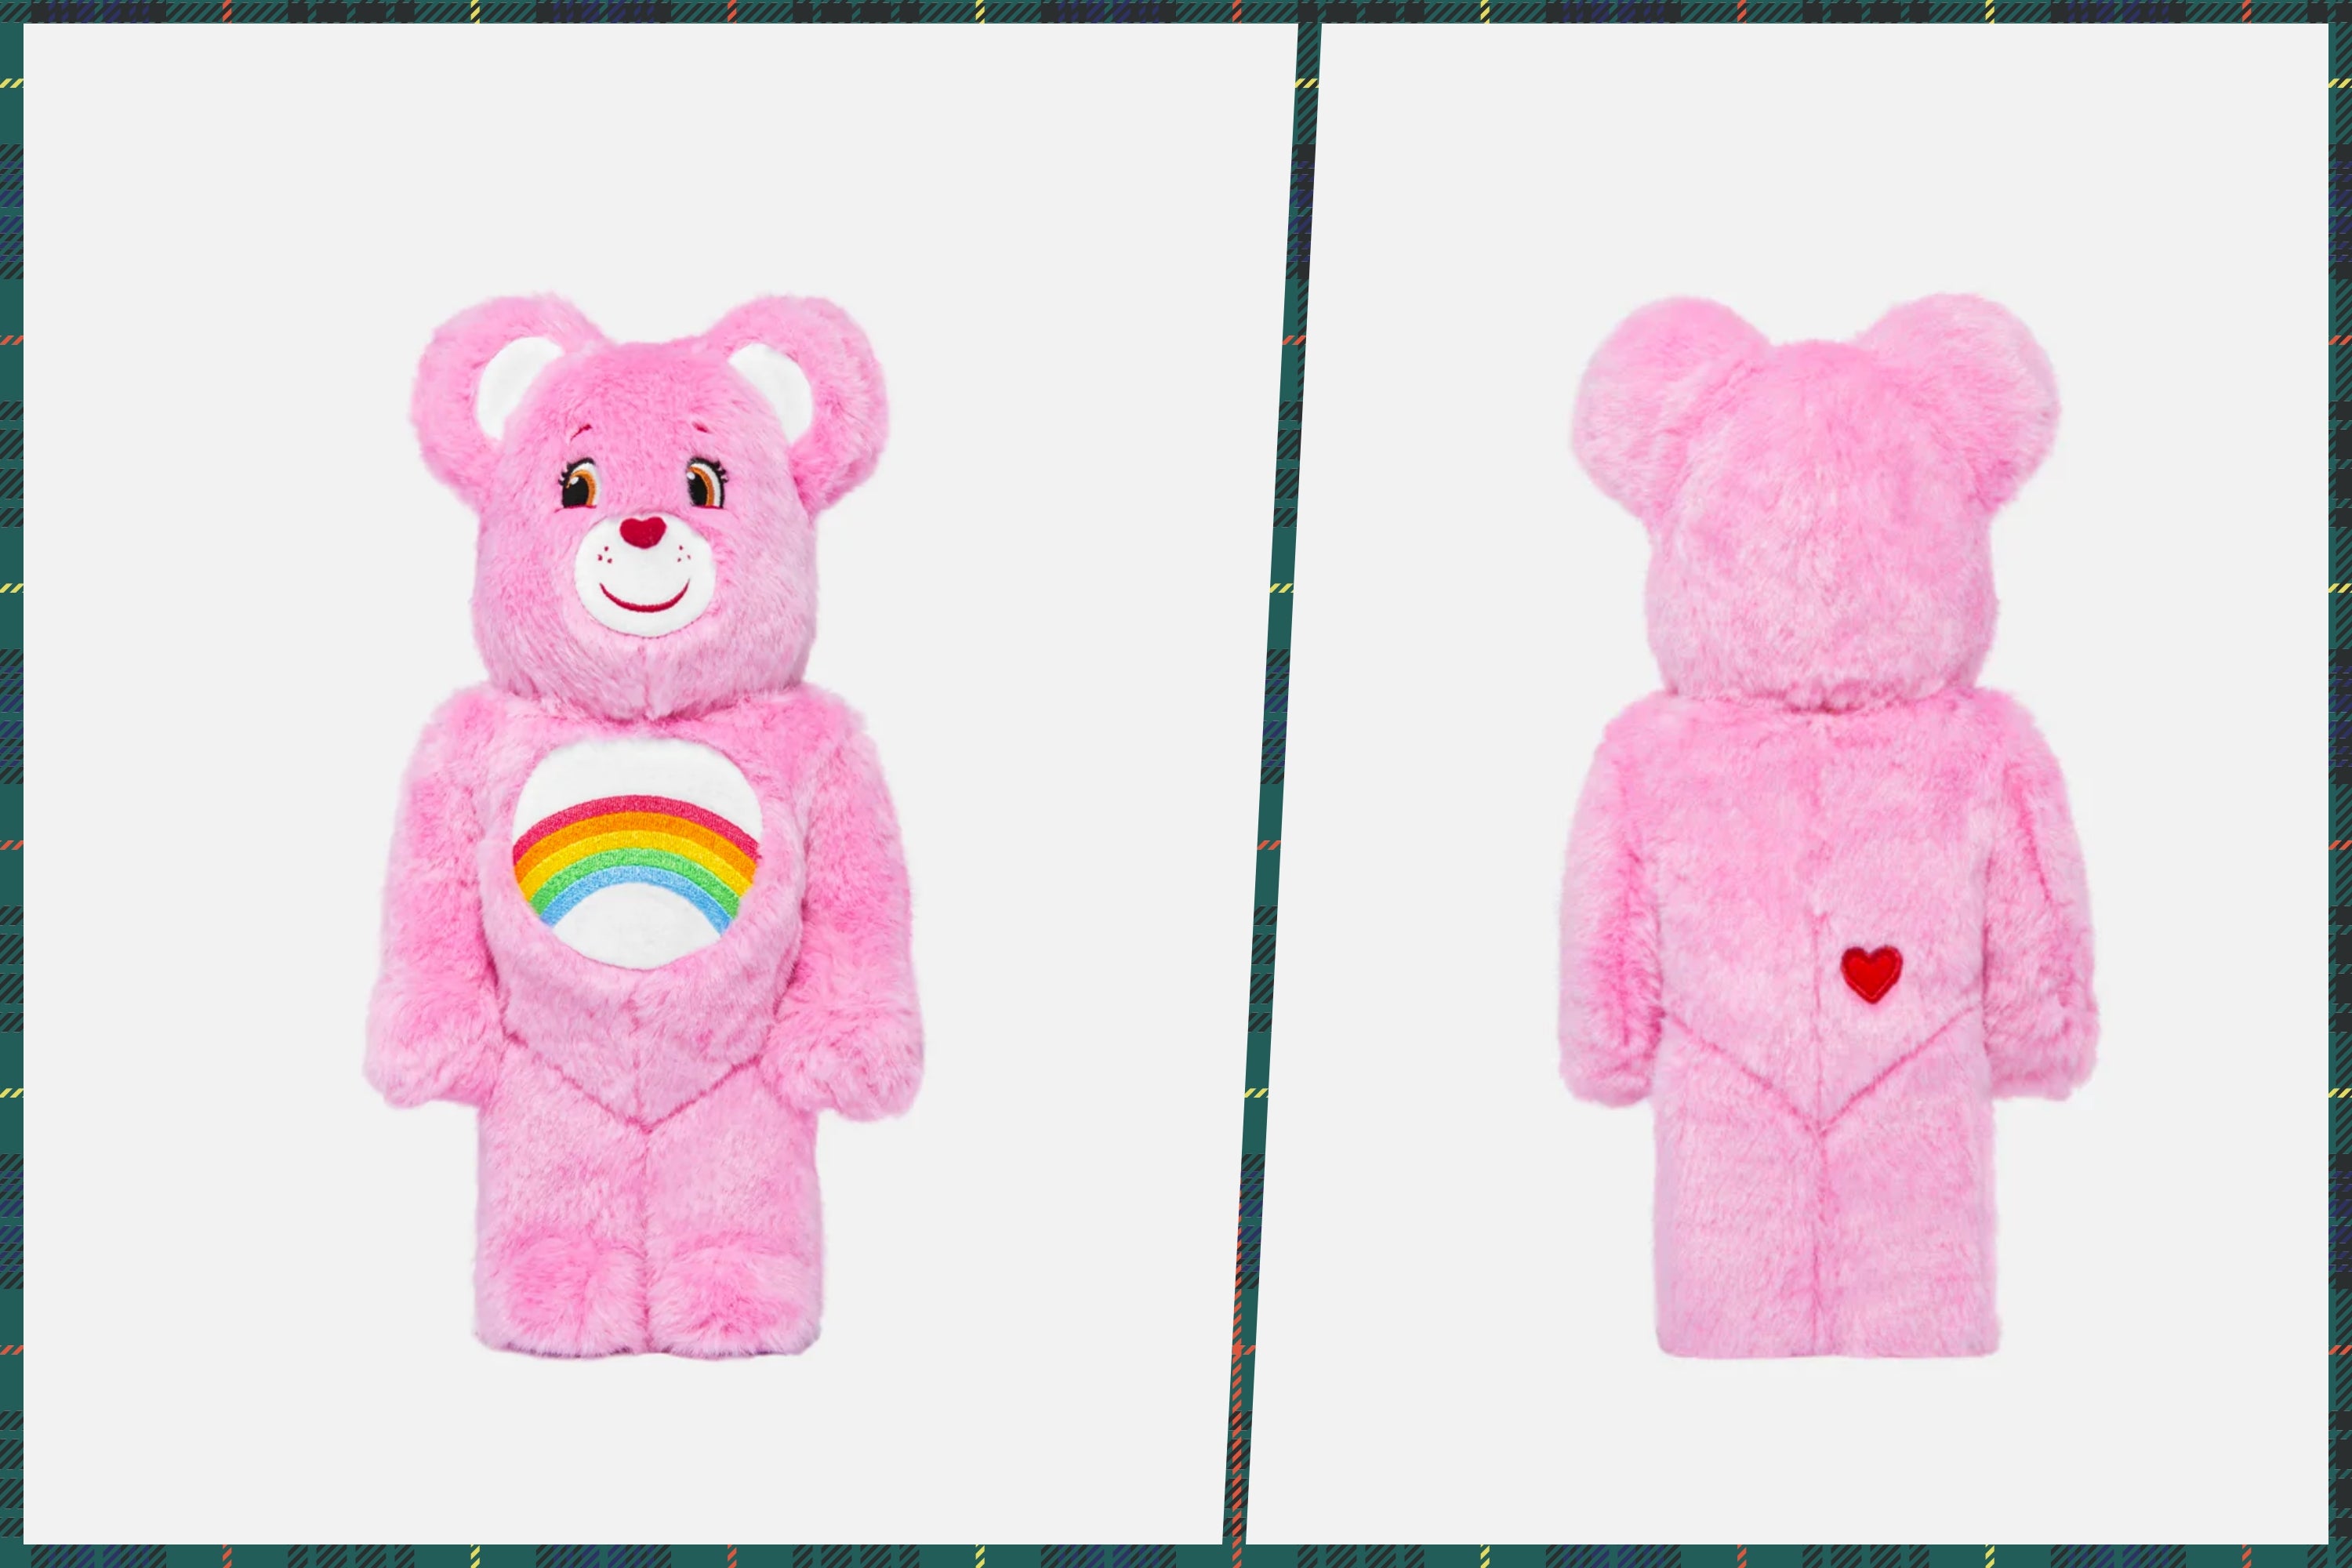 JUICE Holiday Gift Guide - MEDICOM TOY BE@RBRICK Cheer Bear Costume Ver. 400%